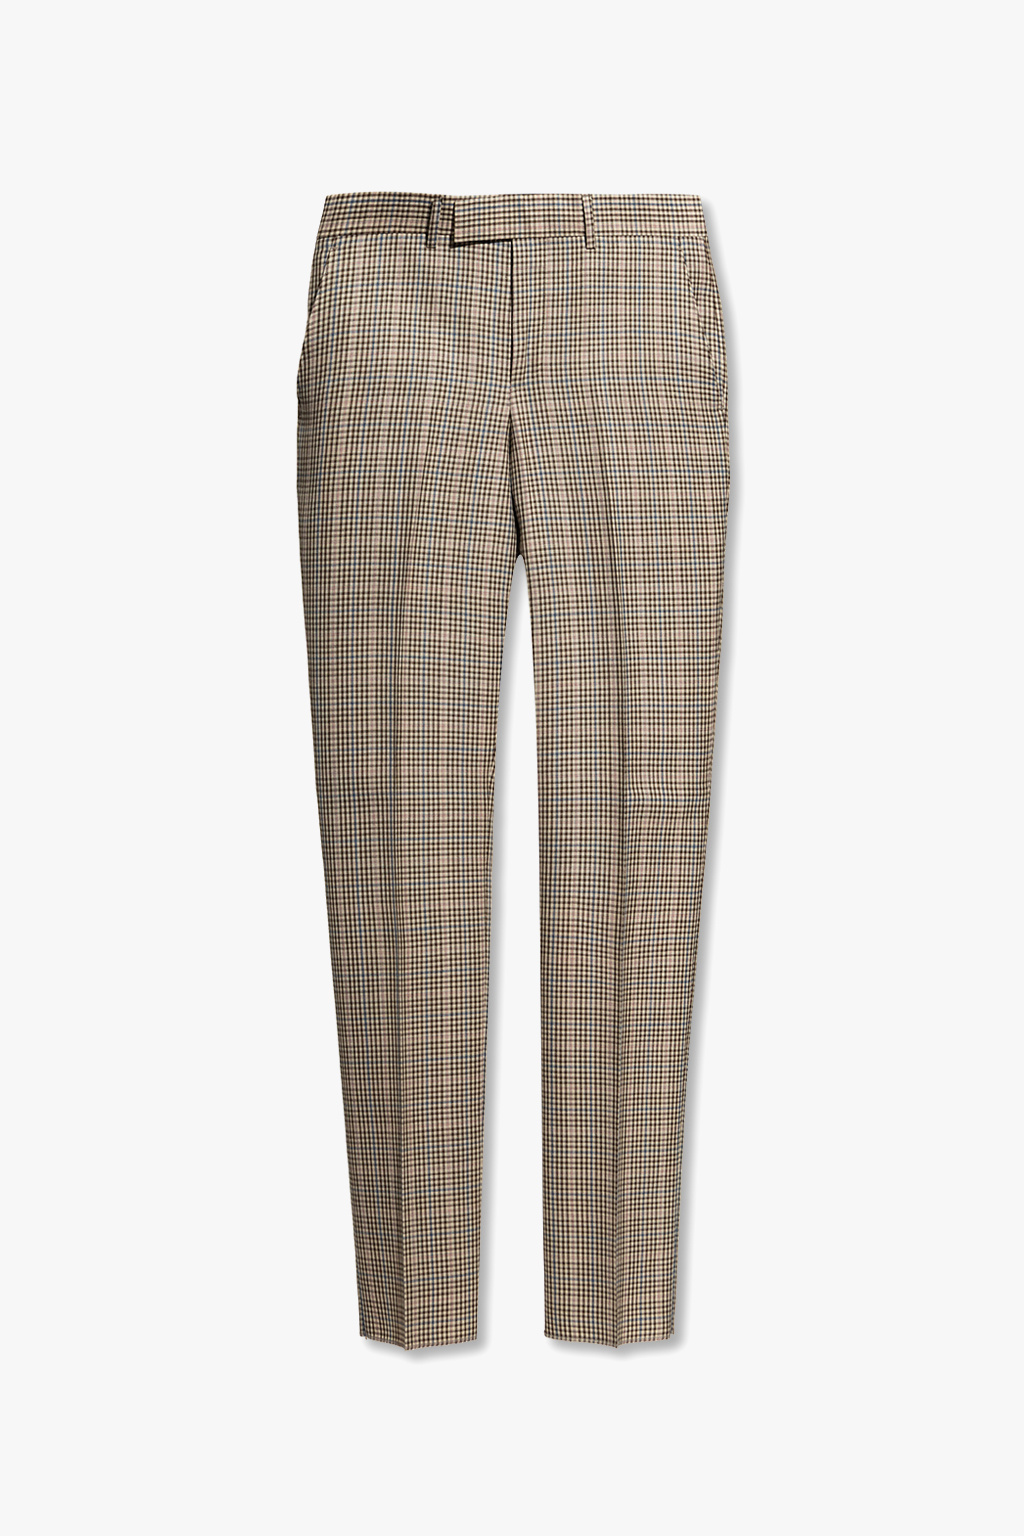 Paul Smith Checked trousers